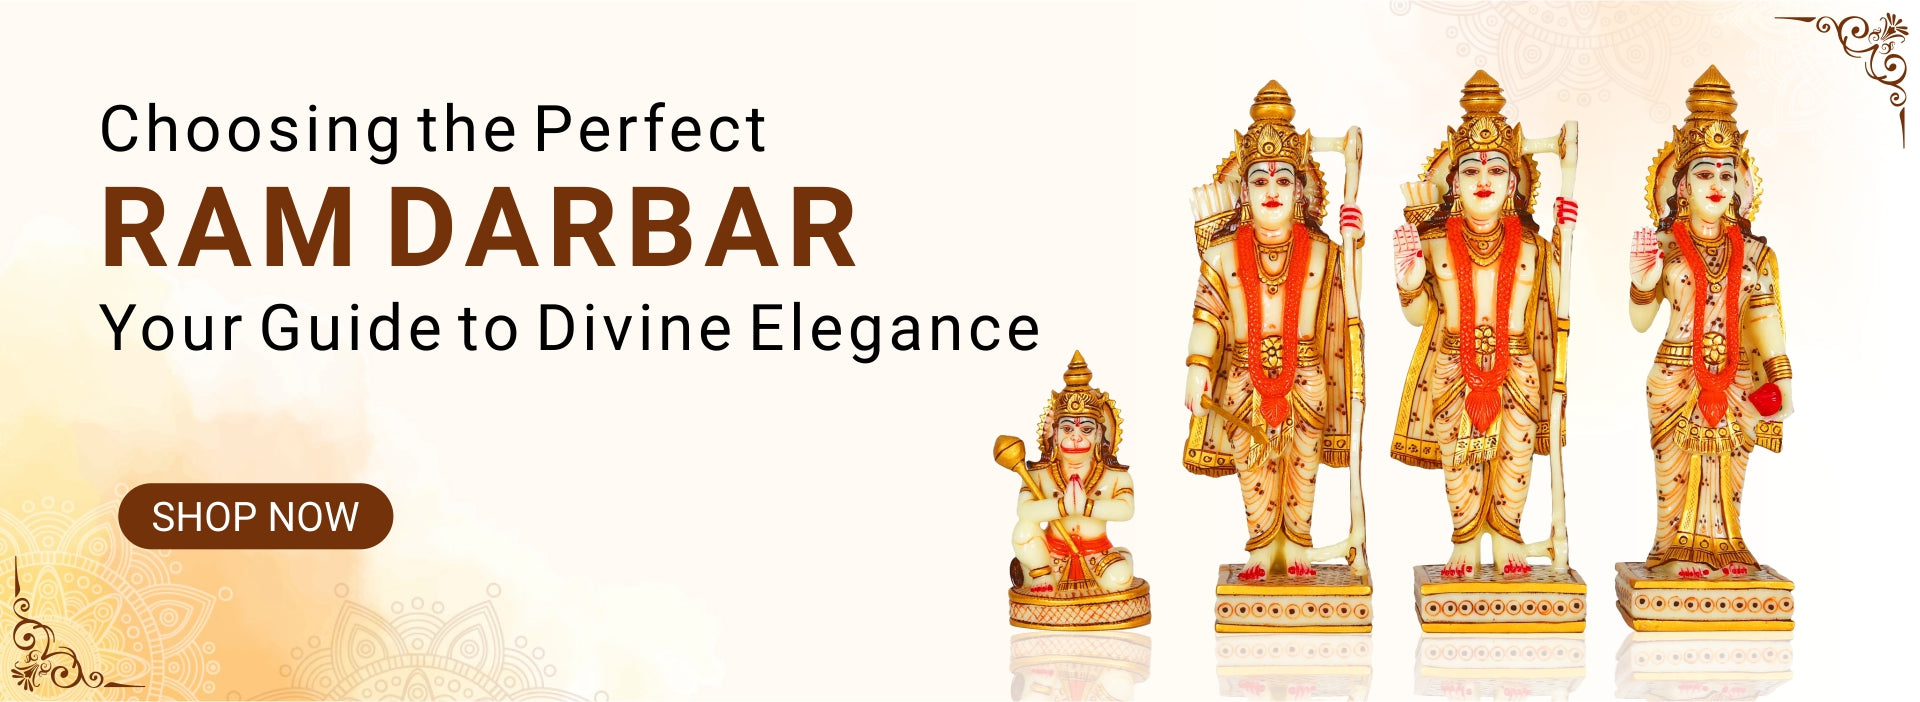 Choosing the Perfect Ram Darbar: Your Guide to Divine Elegance